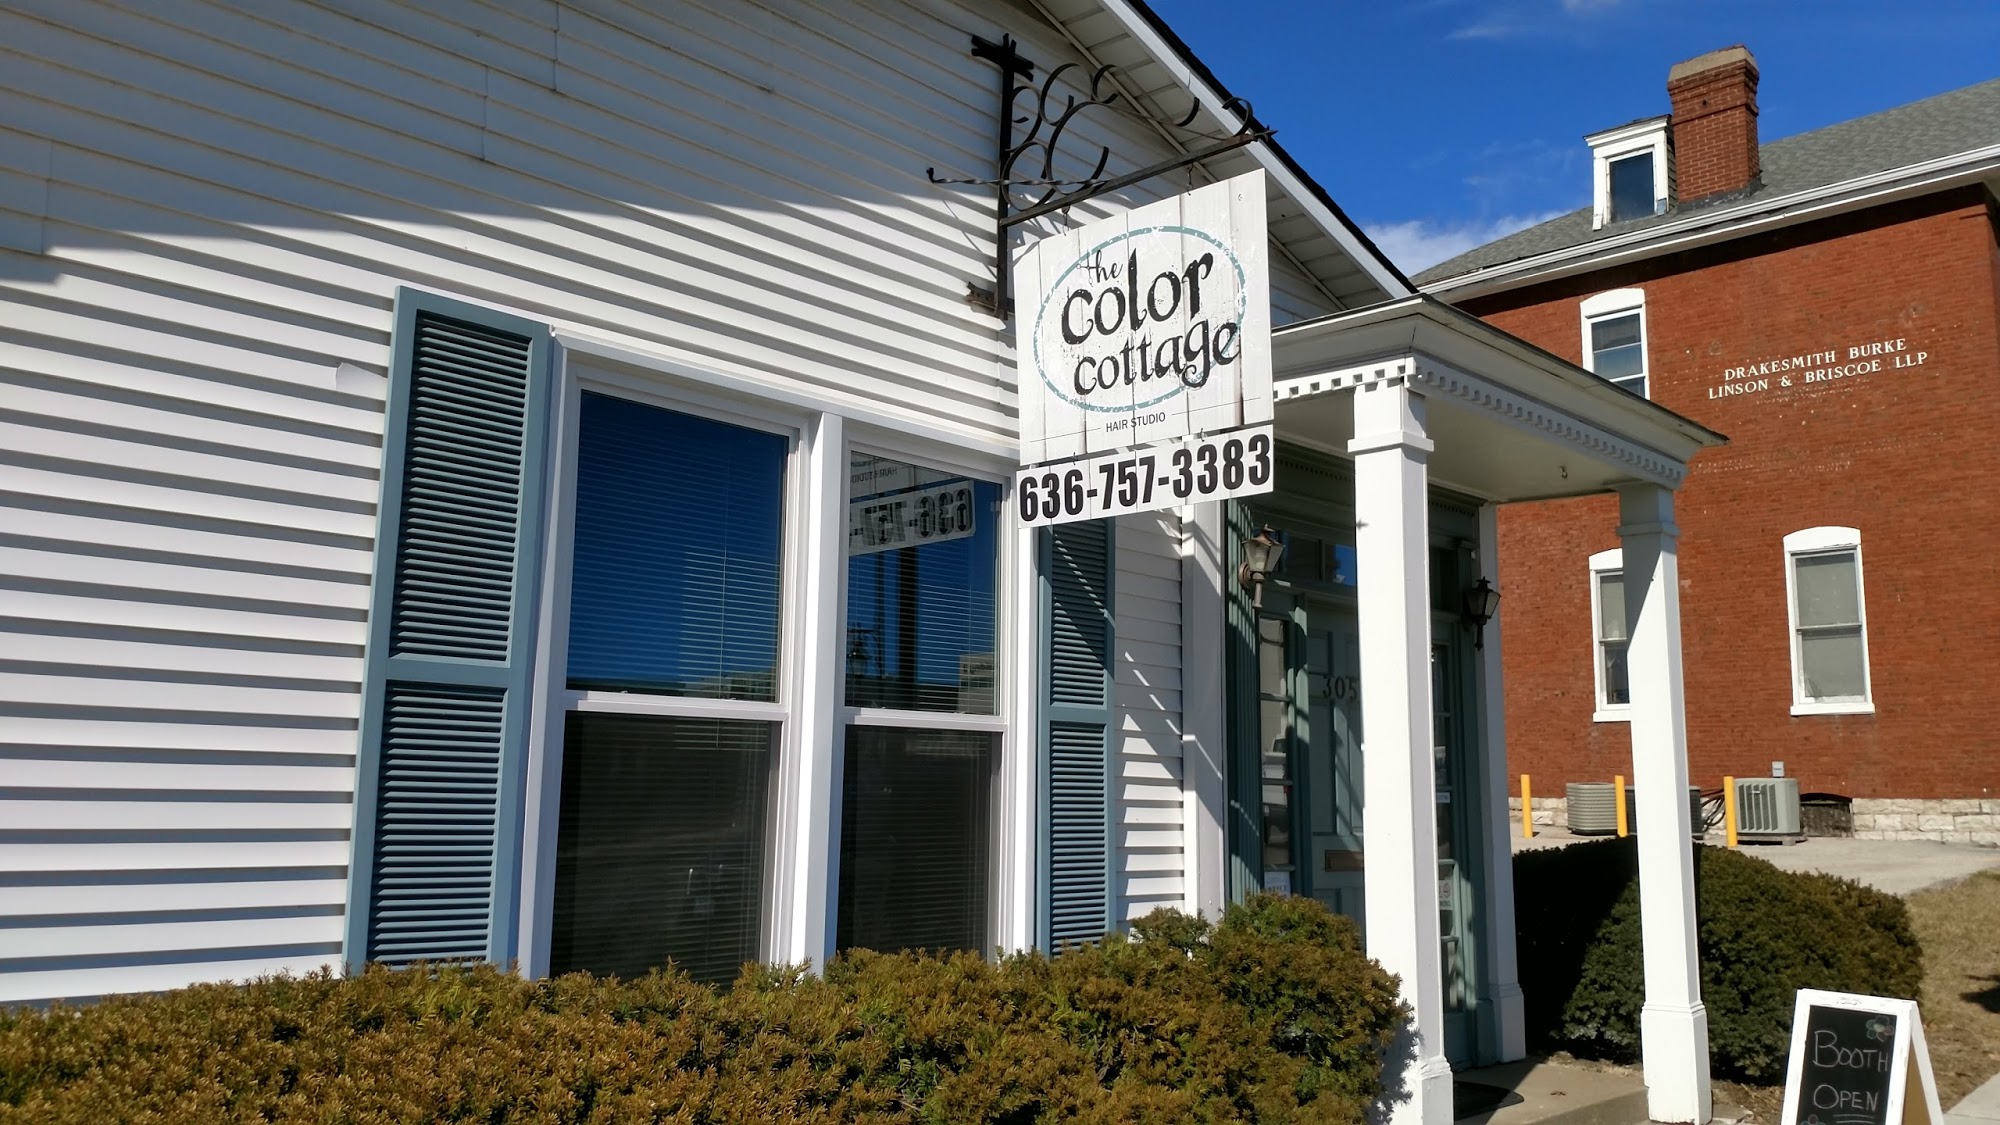 The Color Cottage